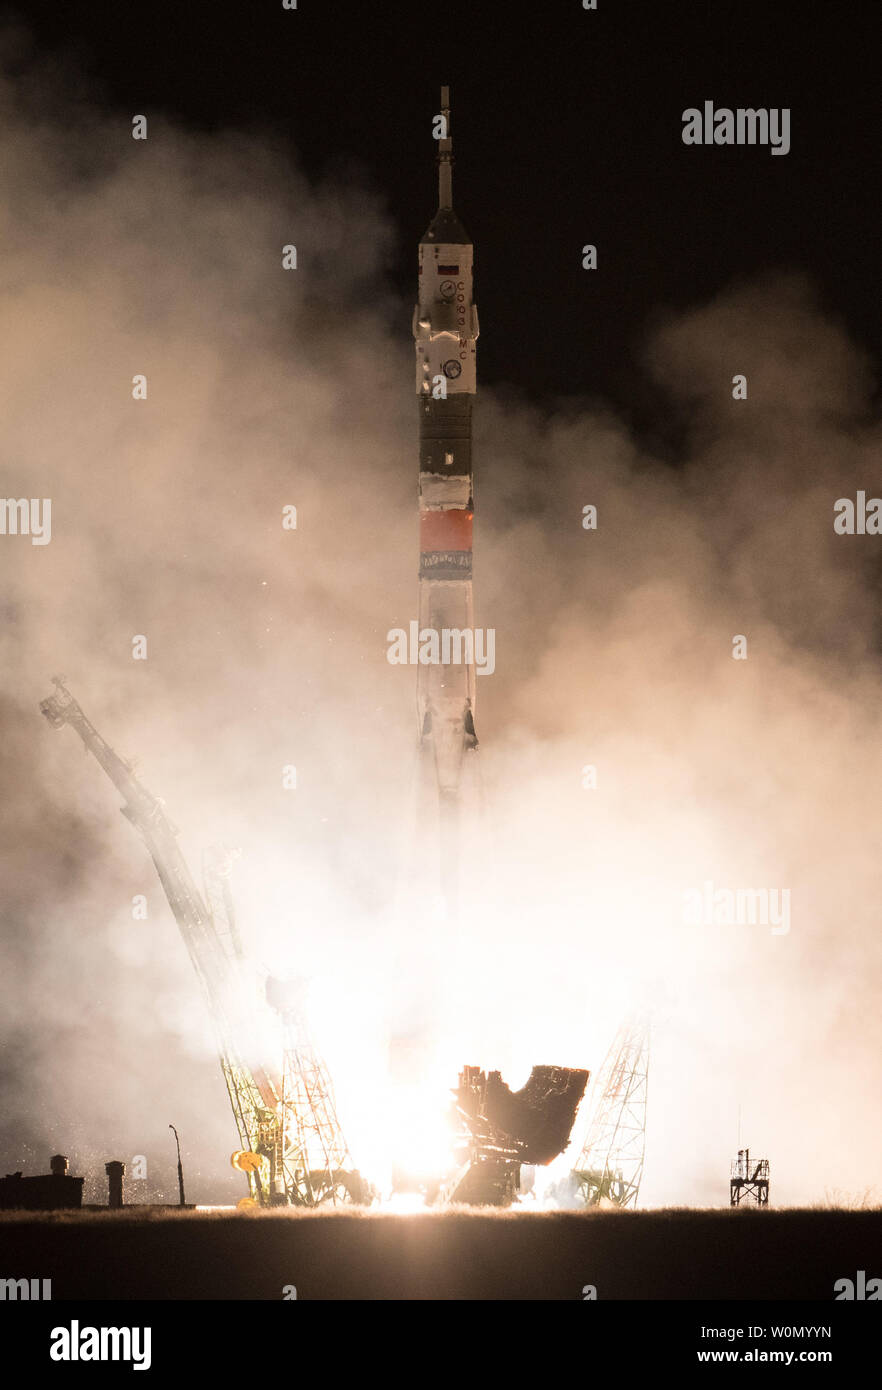 The Soyuz MS-08 rocket is launched with Expedition 55 Soyuz Commander Oleg Artemyev of Roscosmos and flight engineers Ricky Arnold and Drew Feustel of NASA, on March 21, 2018, at the Baikonur Cosmodrome in Kazakhstan. Artemyev, Arnold, and Feustel will spend the next five months living and working aboard the International Space Station. NASA Photo by Joel Kowsky/UPI Stock Photo